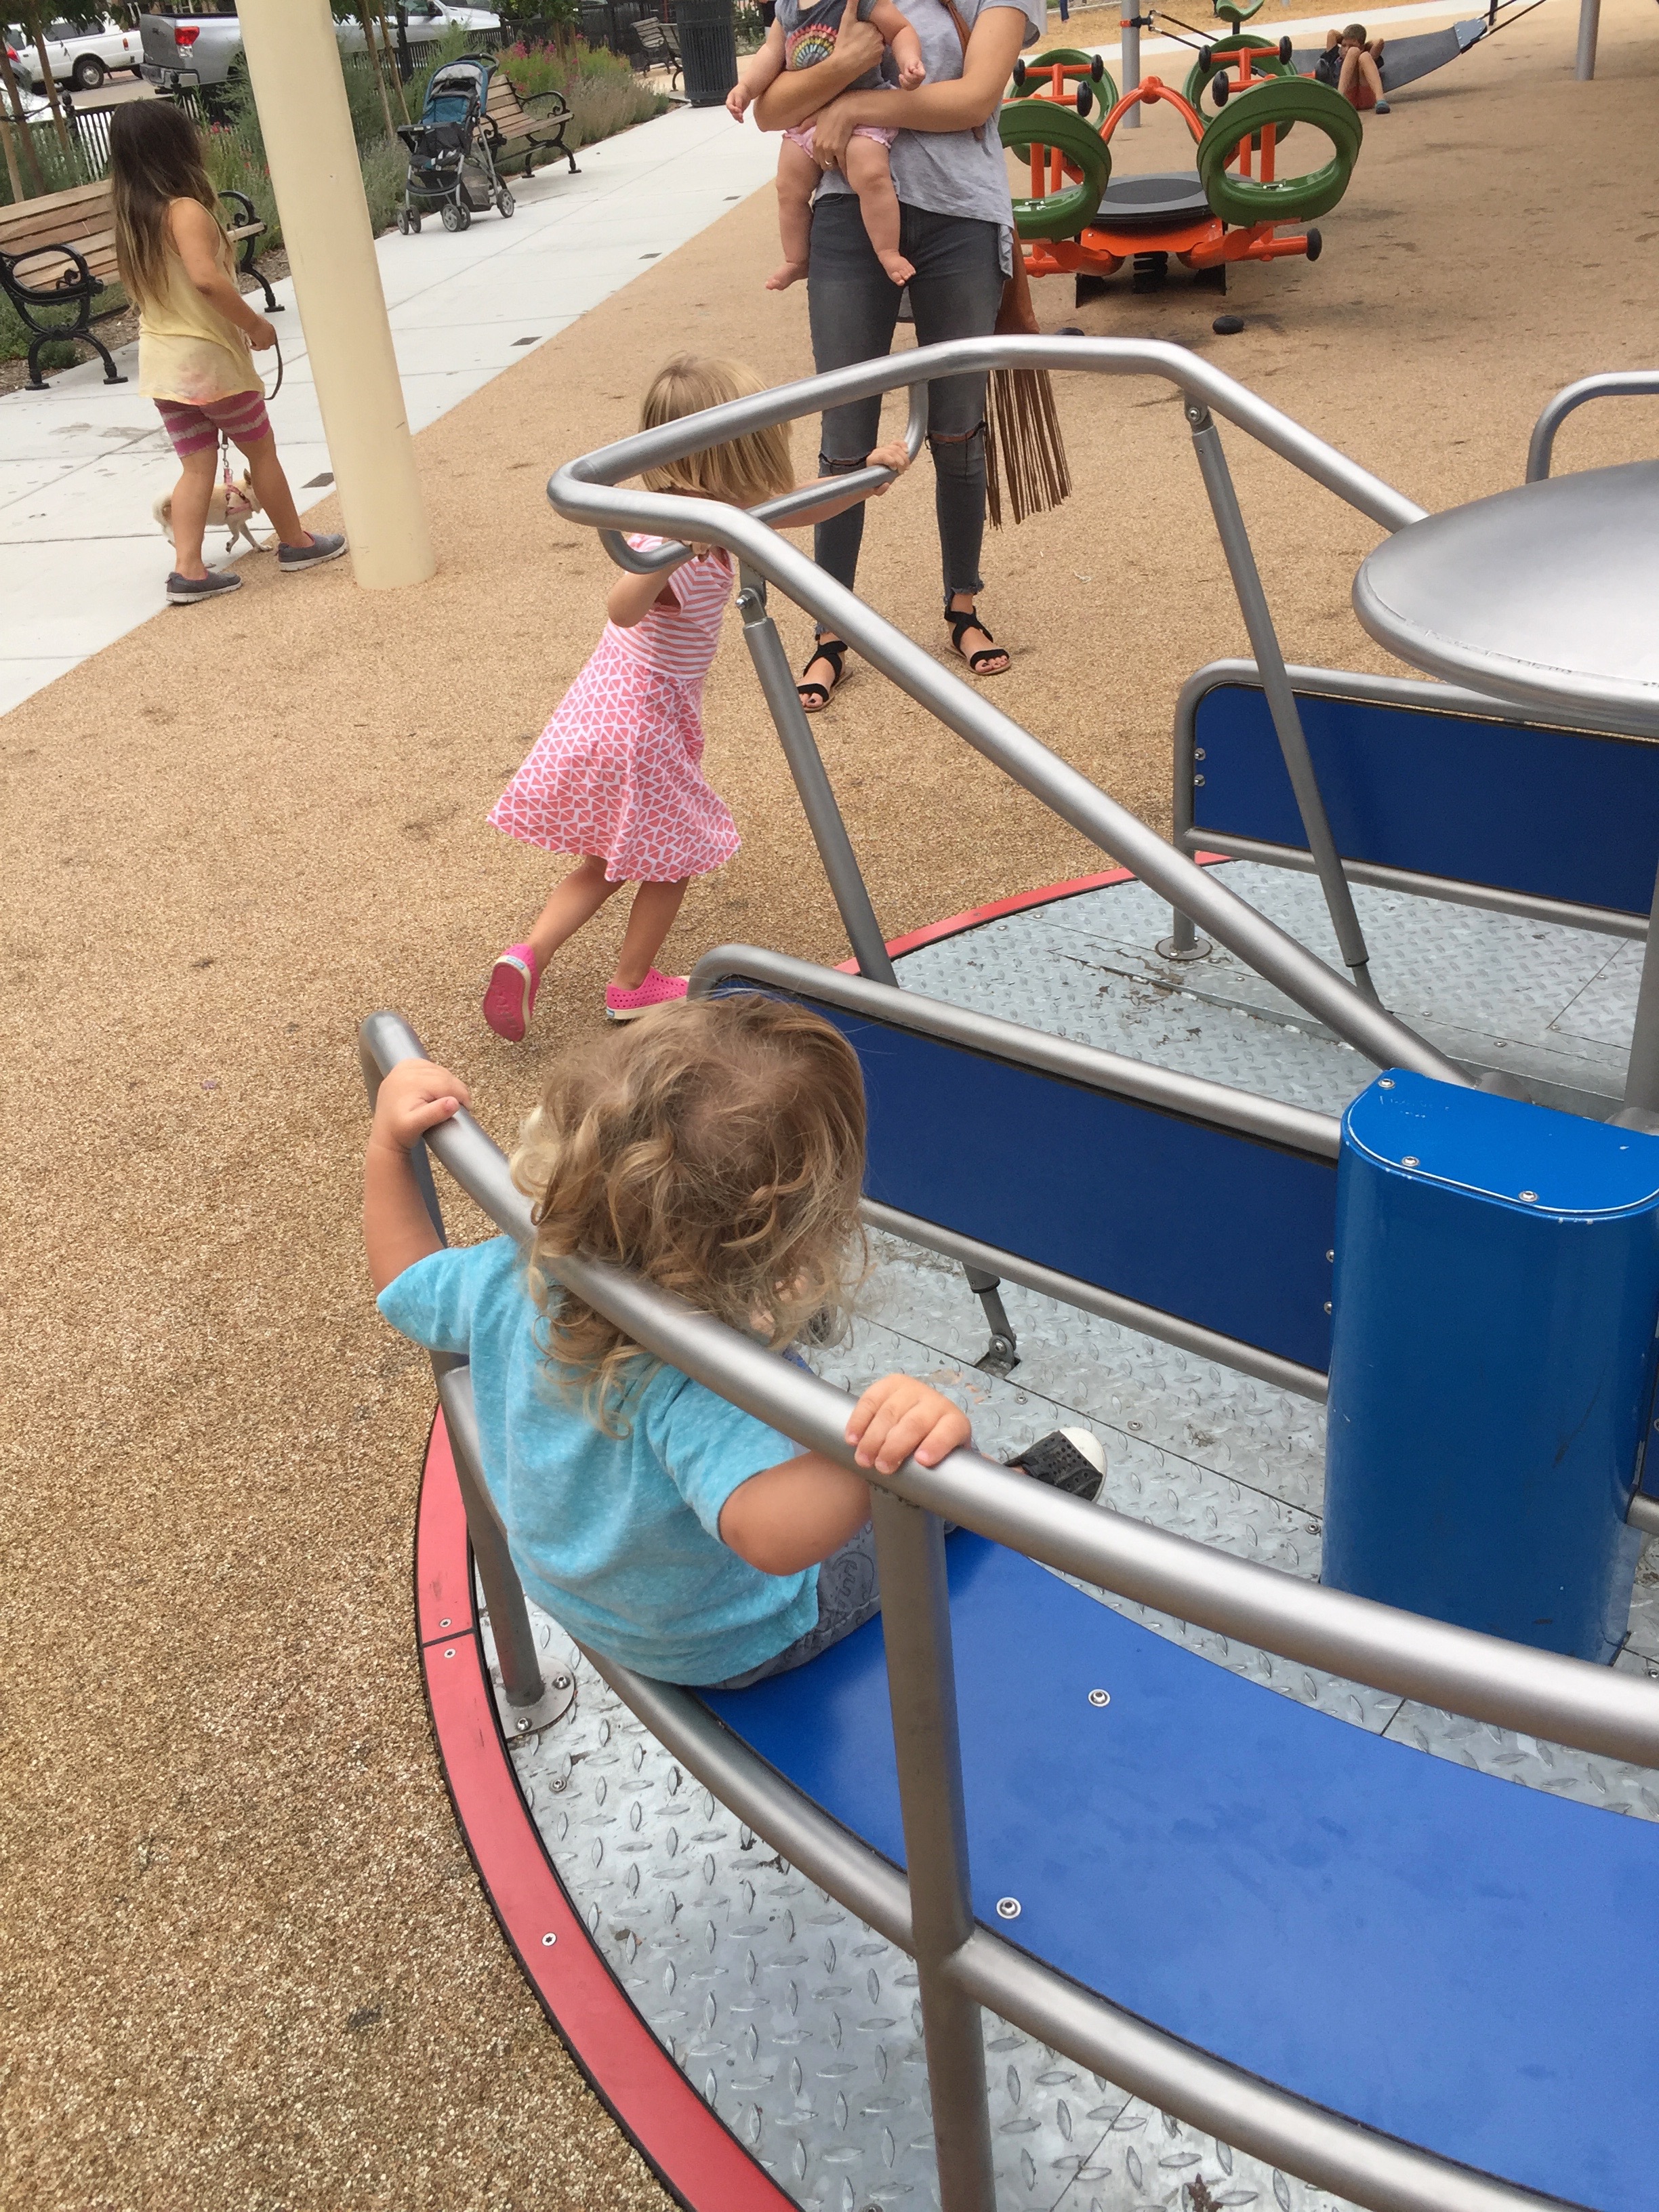 Kids pushing the new and modern merry-go-round at the Paso Robles Downtown City Park Playground